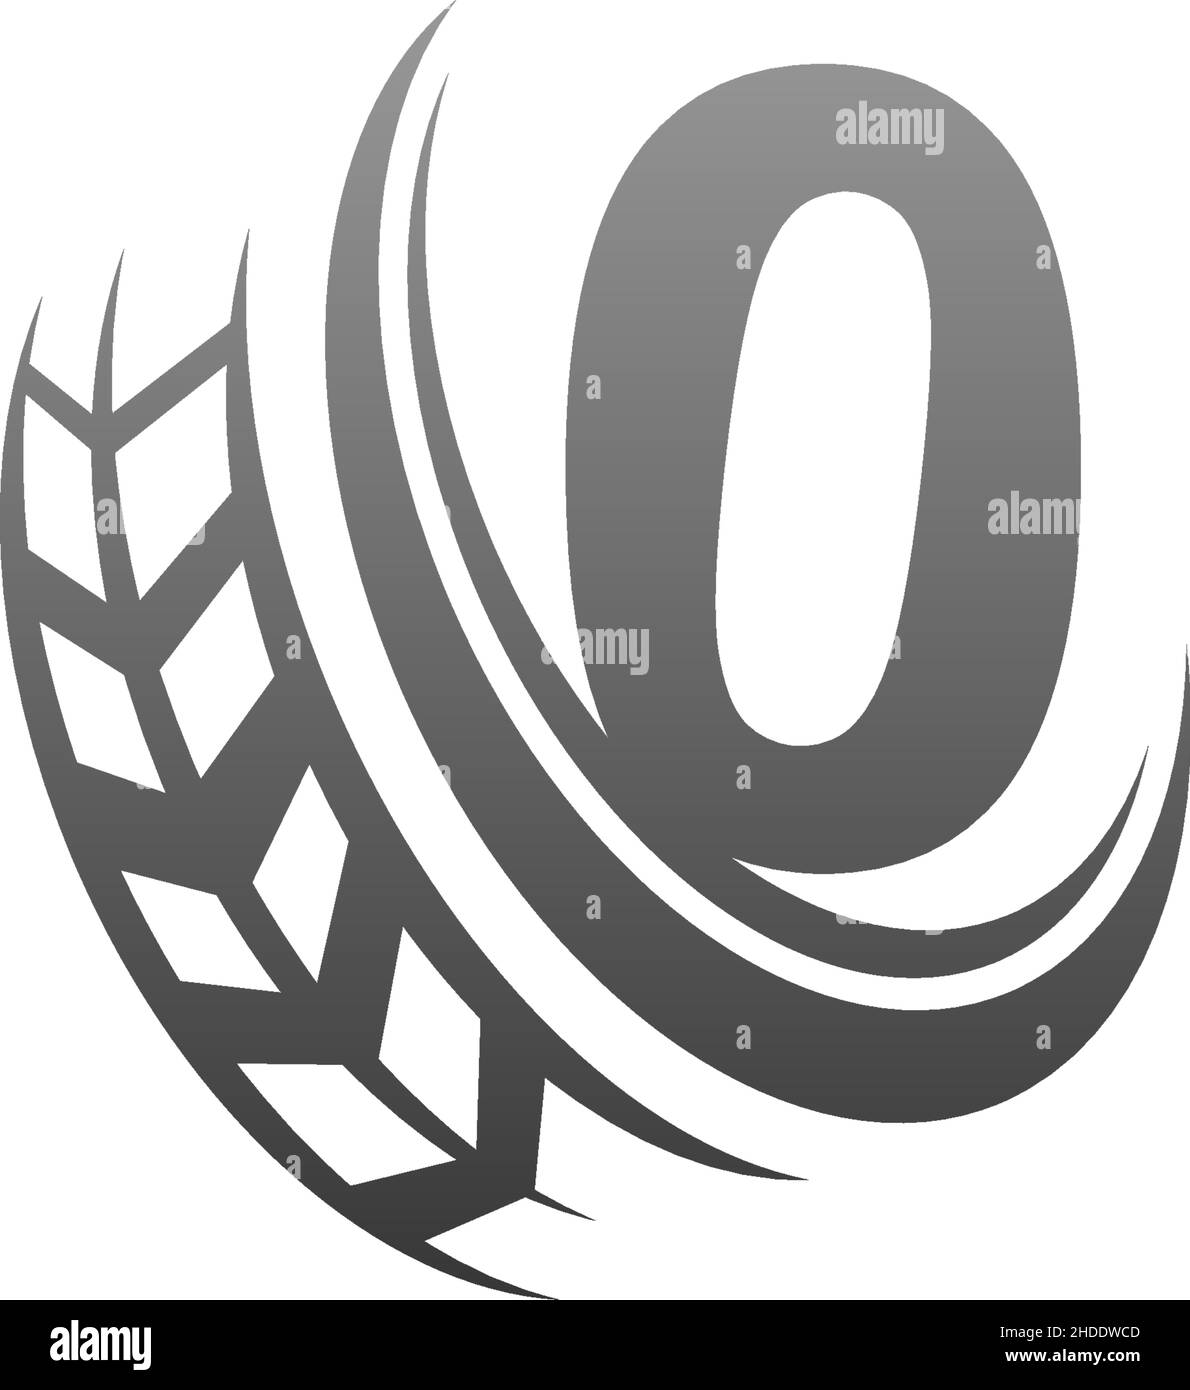 Number zero with trailing wheel icon design template illustration vector Stock Vector